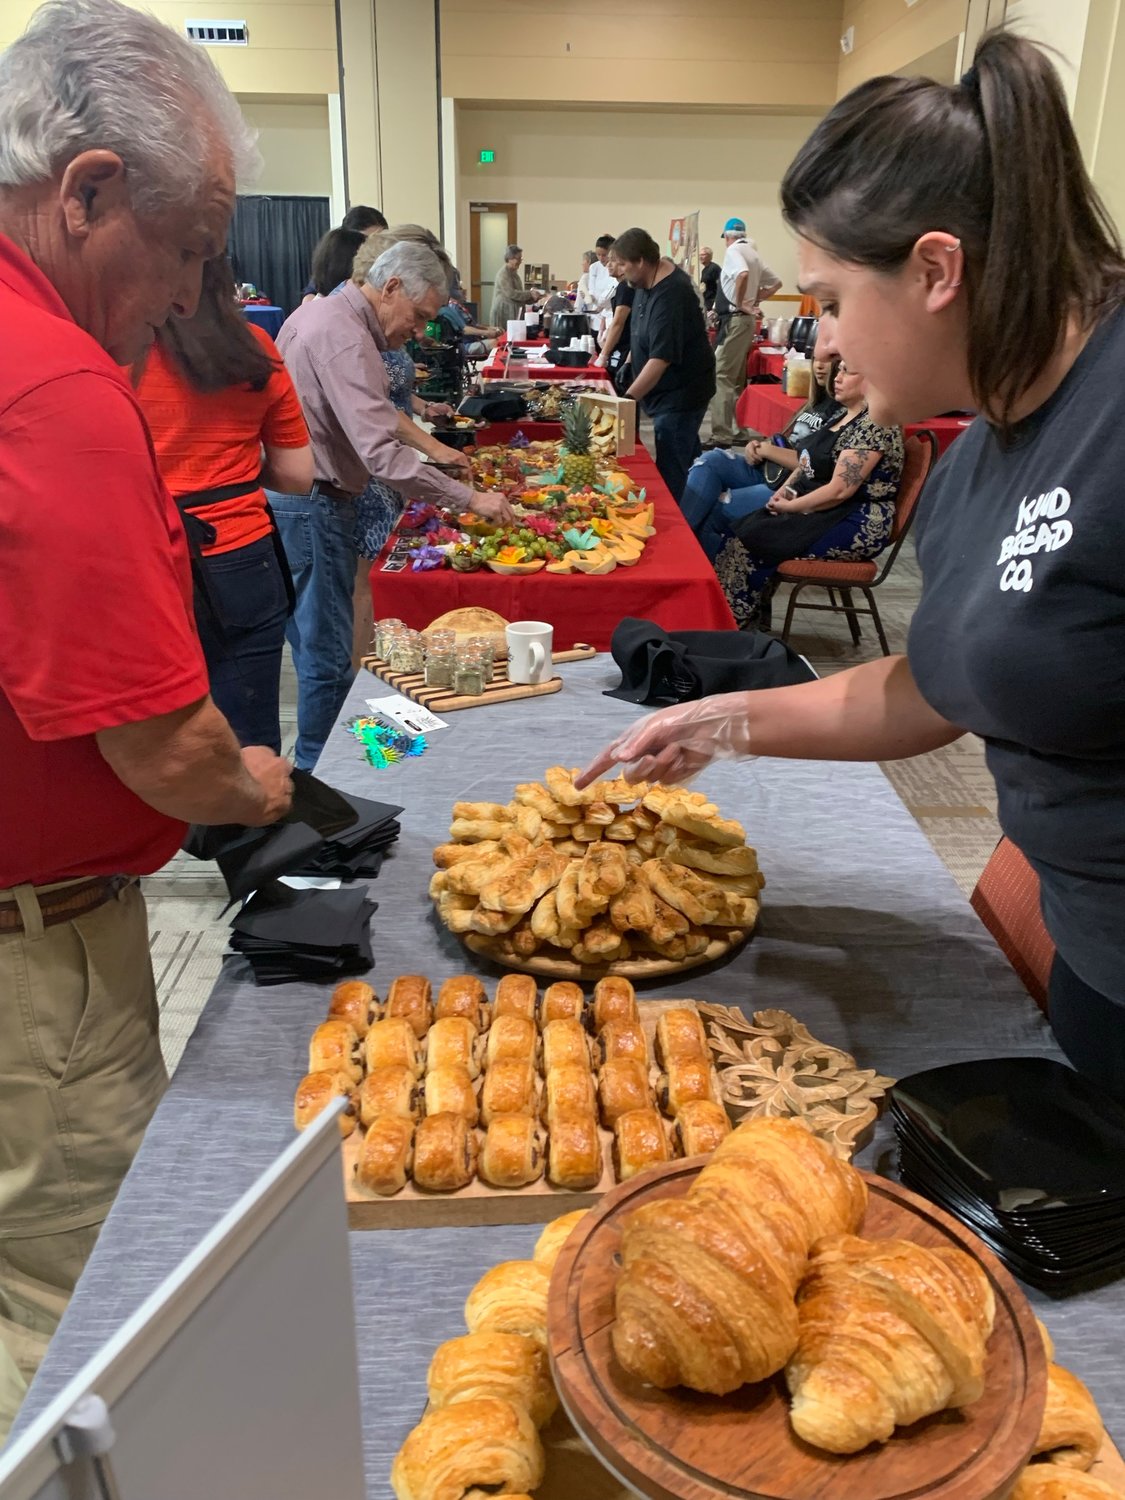 The Kind Bread Co. provided some creative sourdough options for tasting at the Taste of Las Cruces charity event May 12.